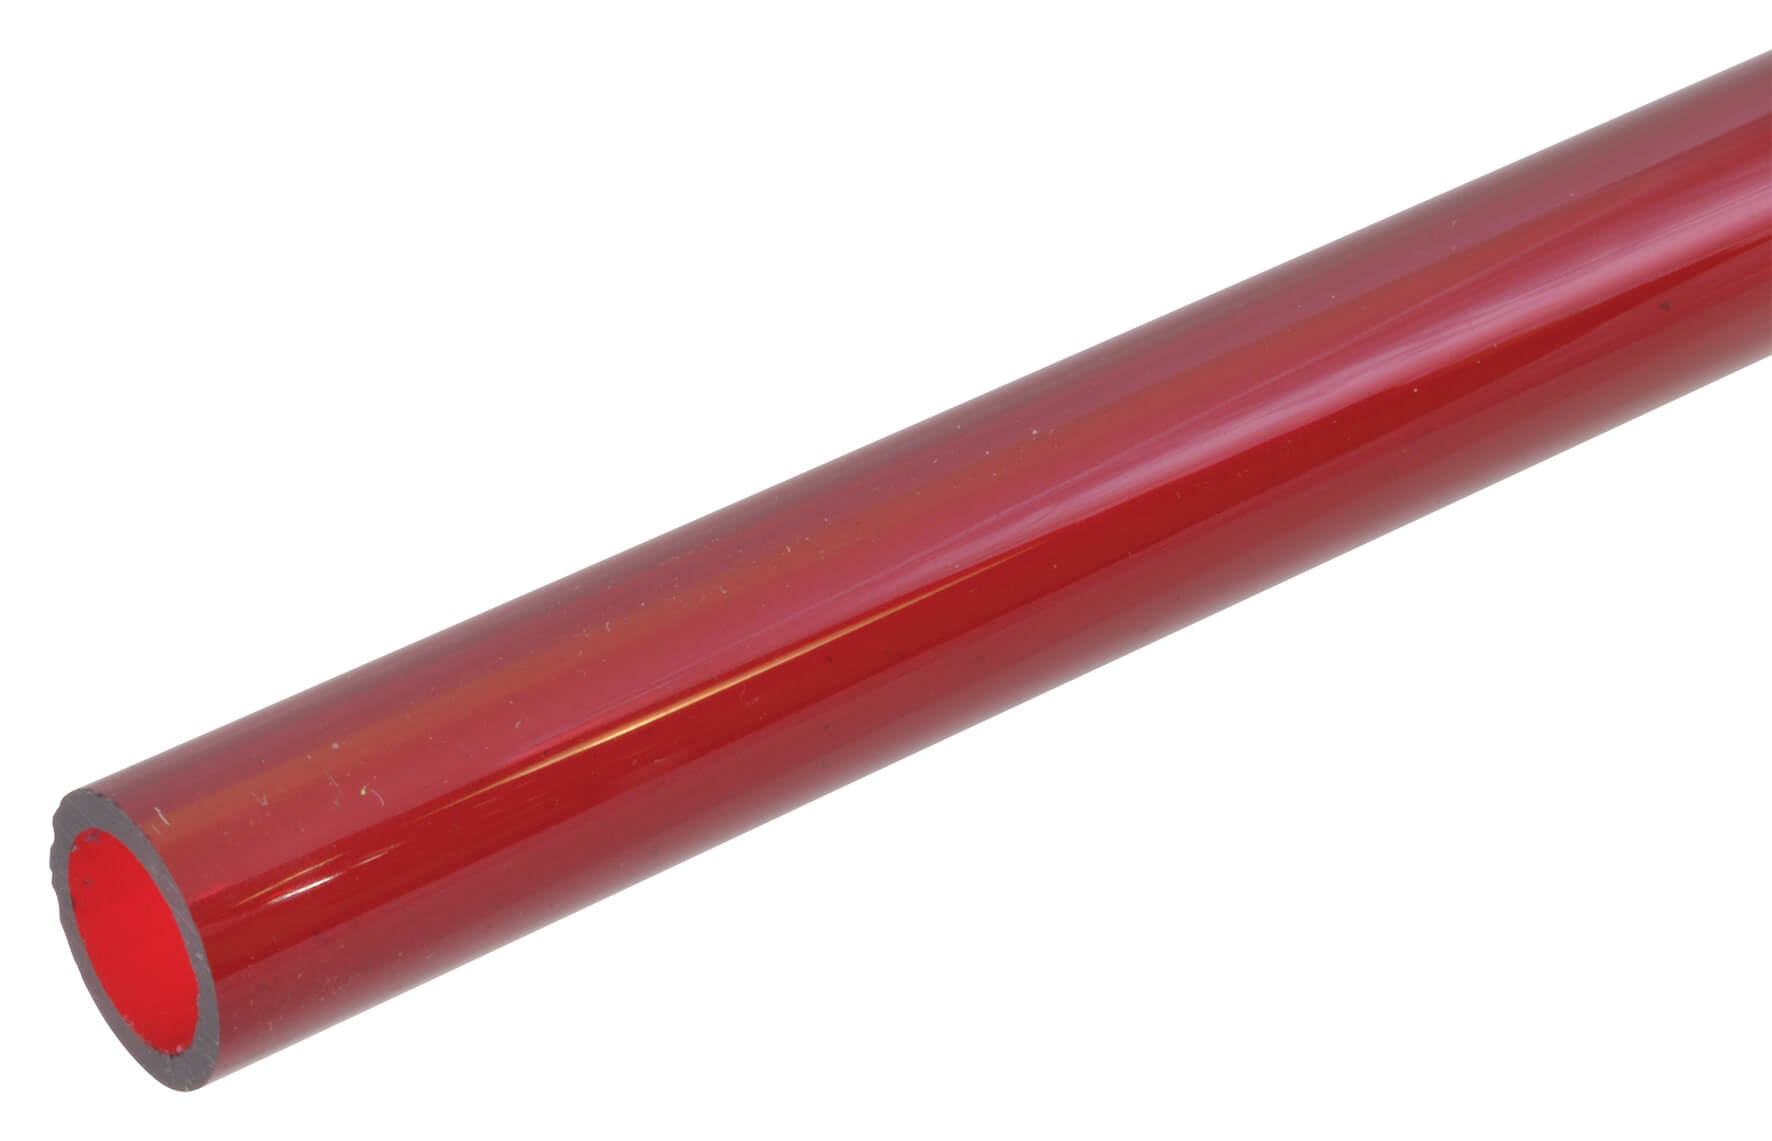 Transparent Acrylic Tube 6.4/3.2mm x 610mm - Red